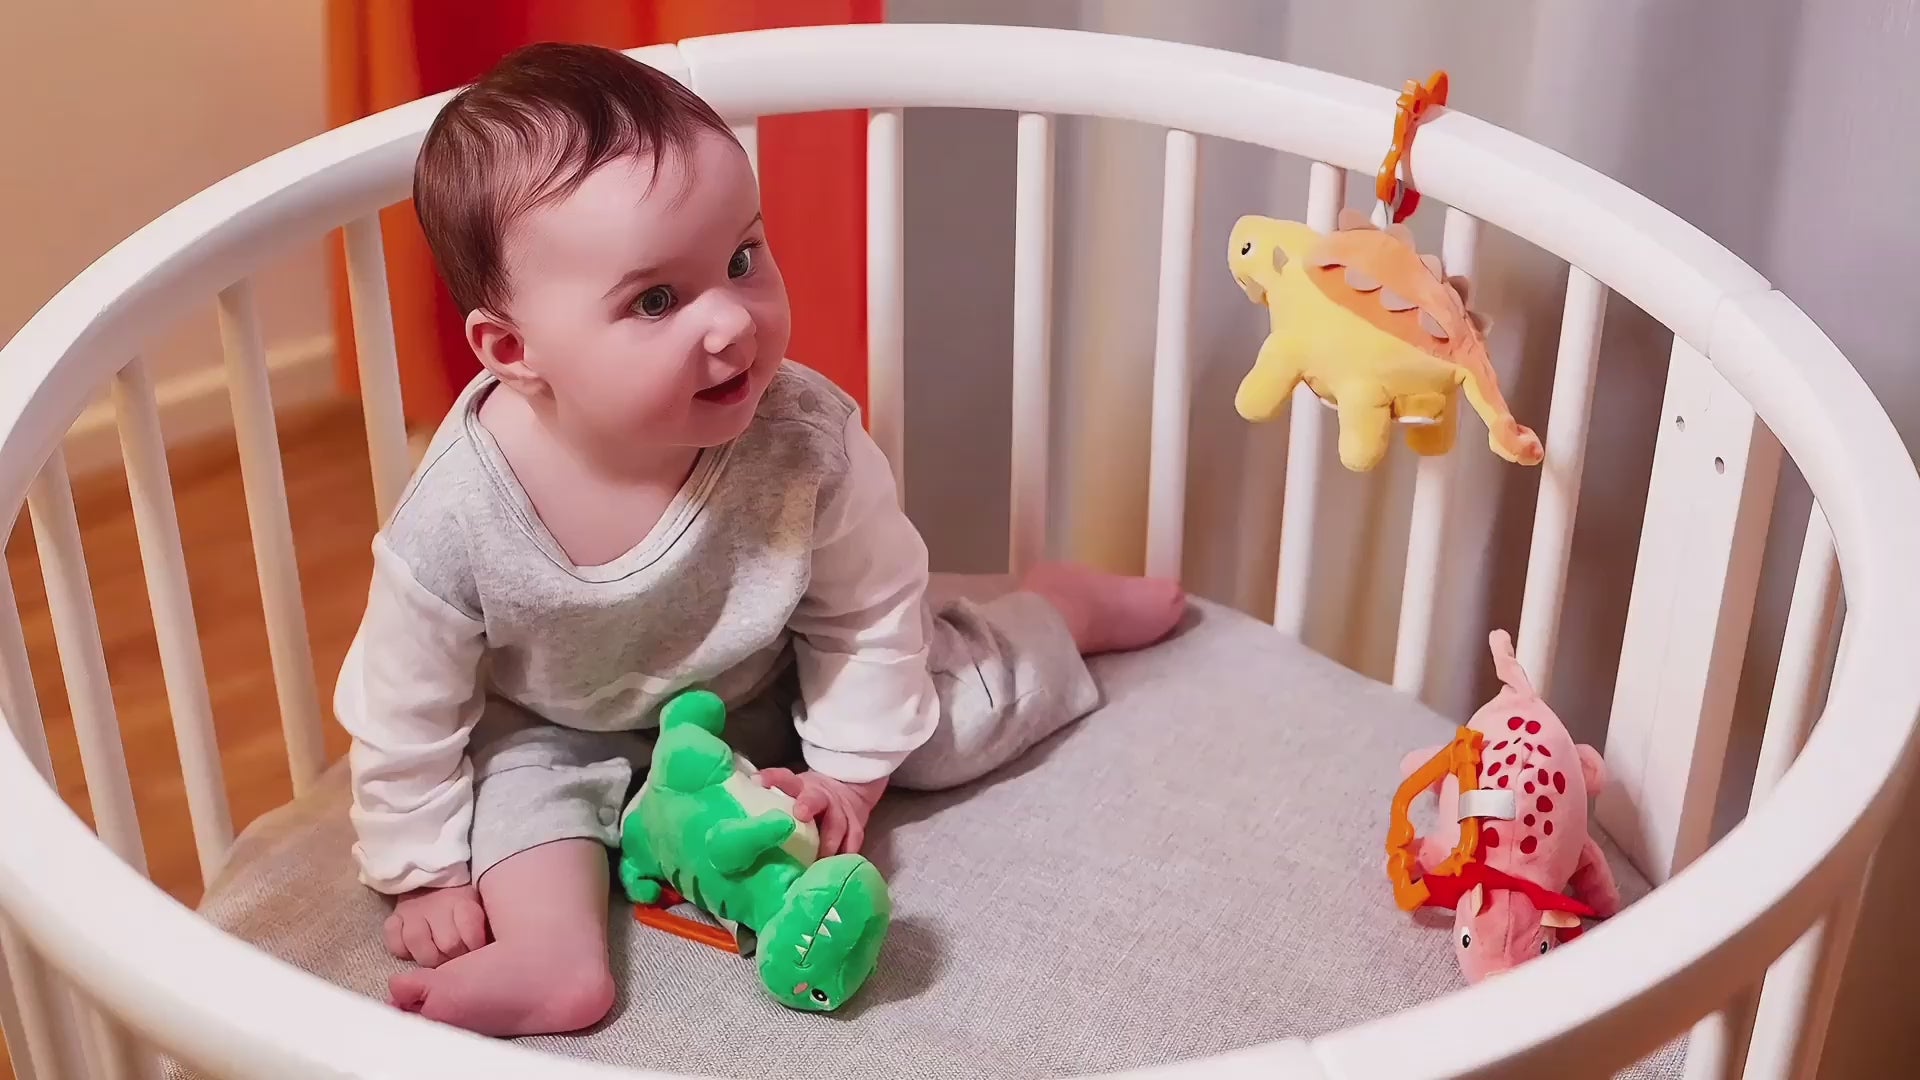 Little-boy-playing-with-hanging-Stuffed-dinosaur-toy